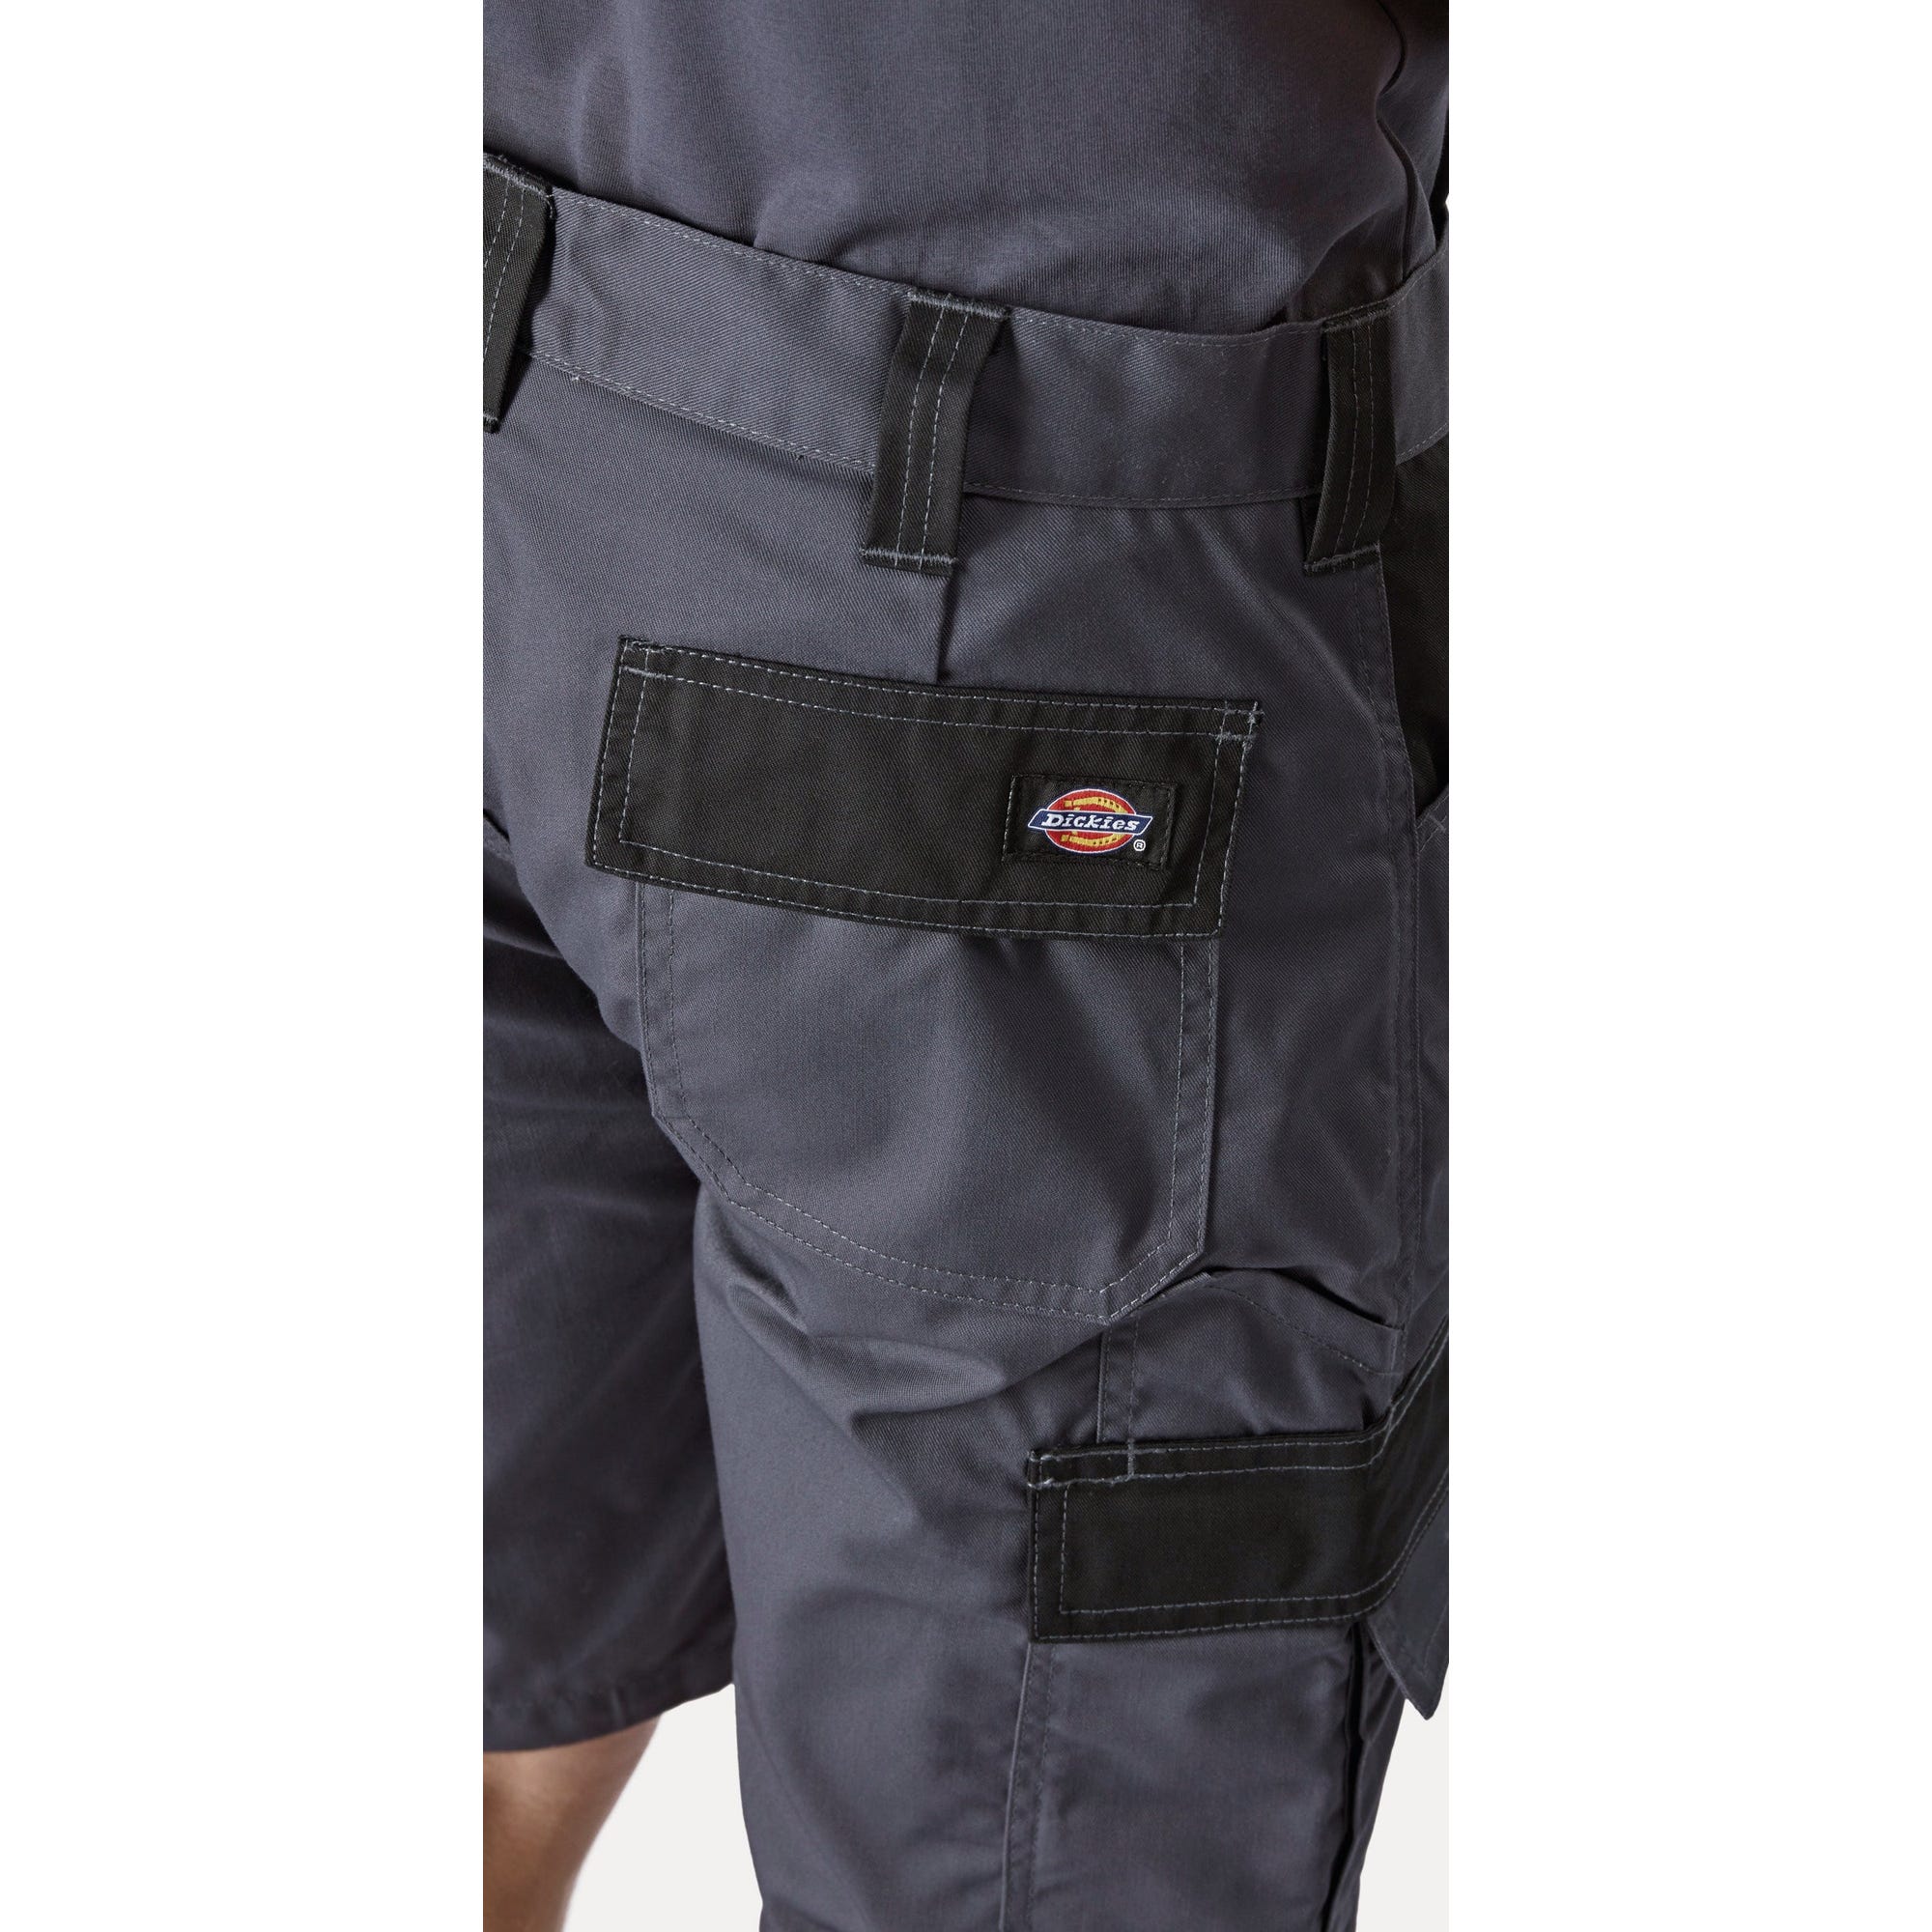 Short Everyday Noir - Dickies - Taille 44 8